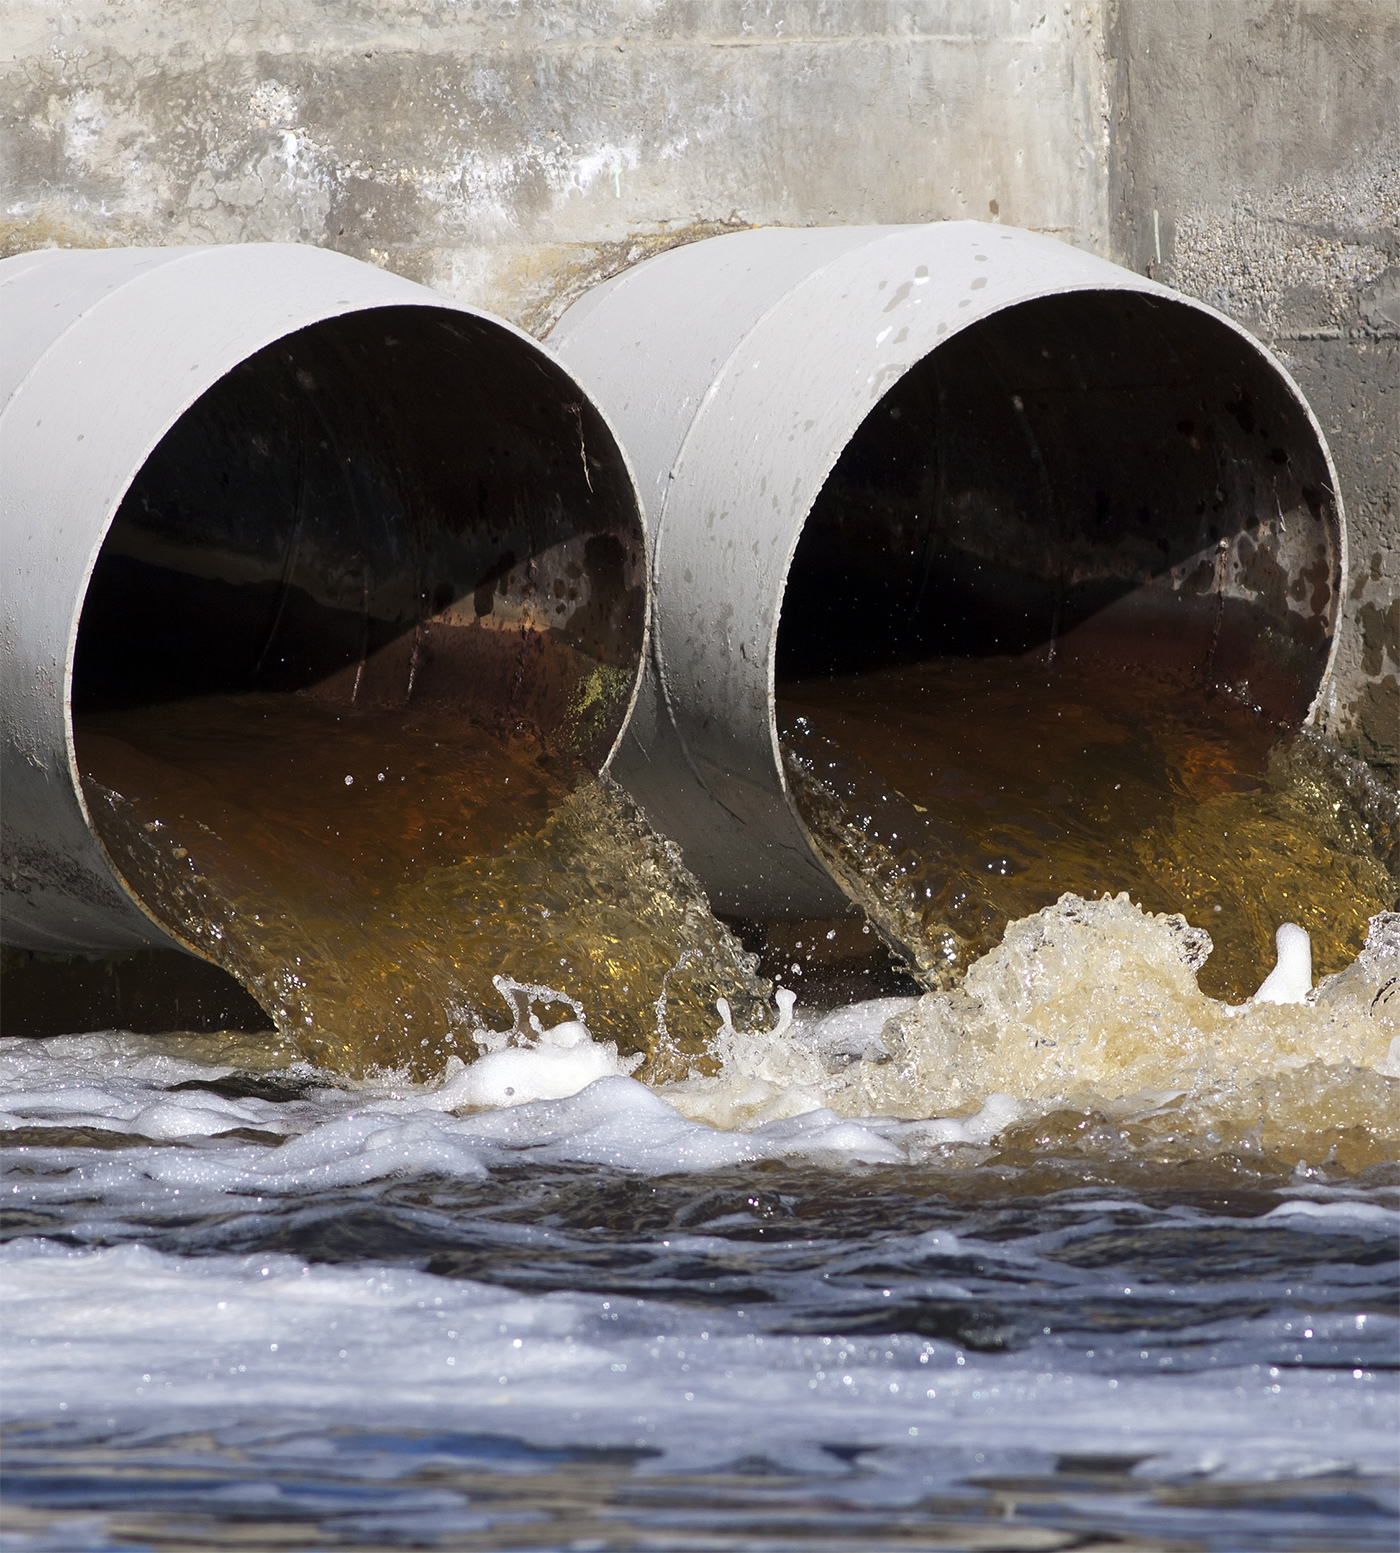 By EPA estimates, combined sewer overflows occur between 23,000 and 75,000 times every year.